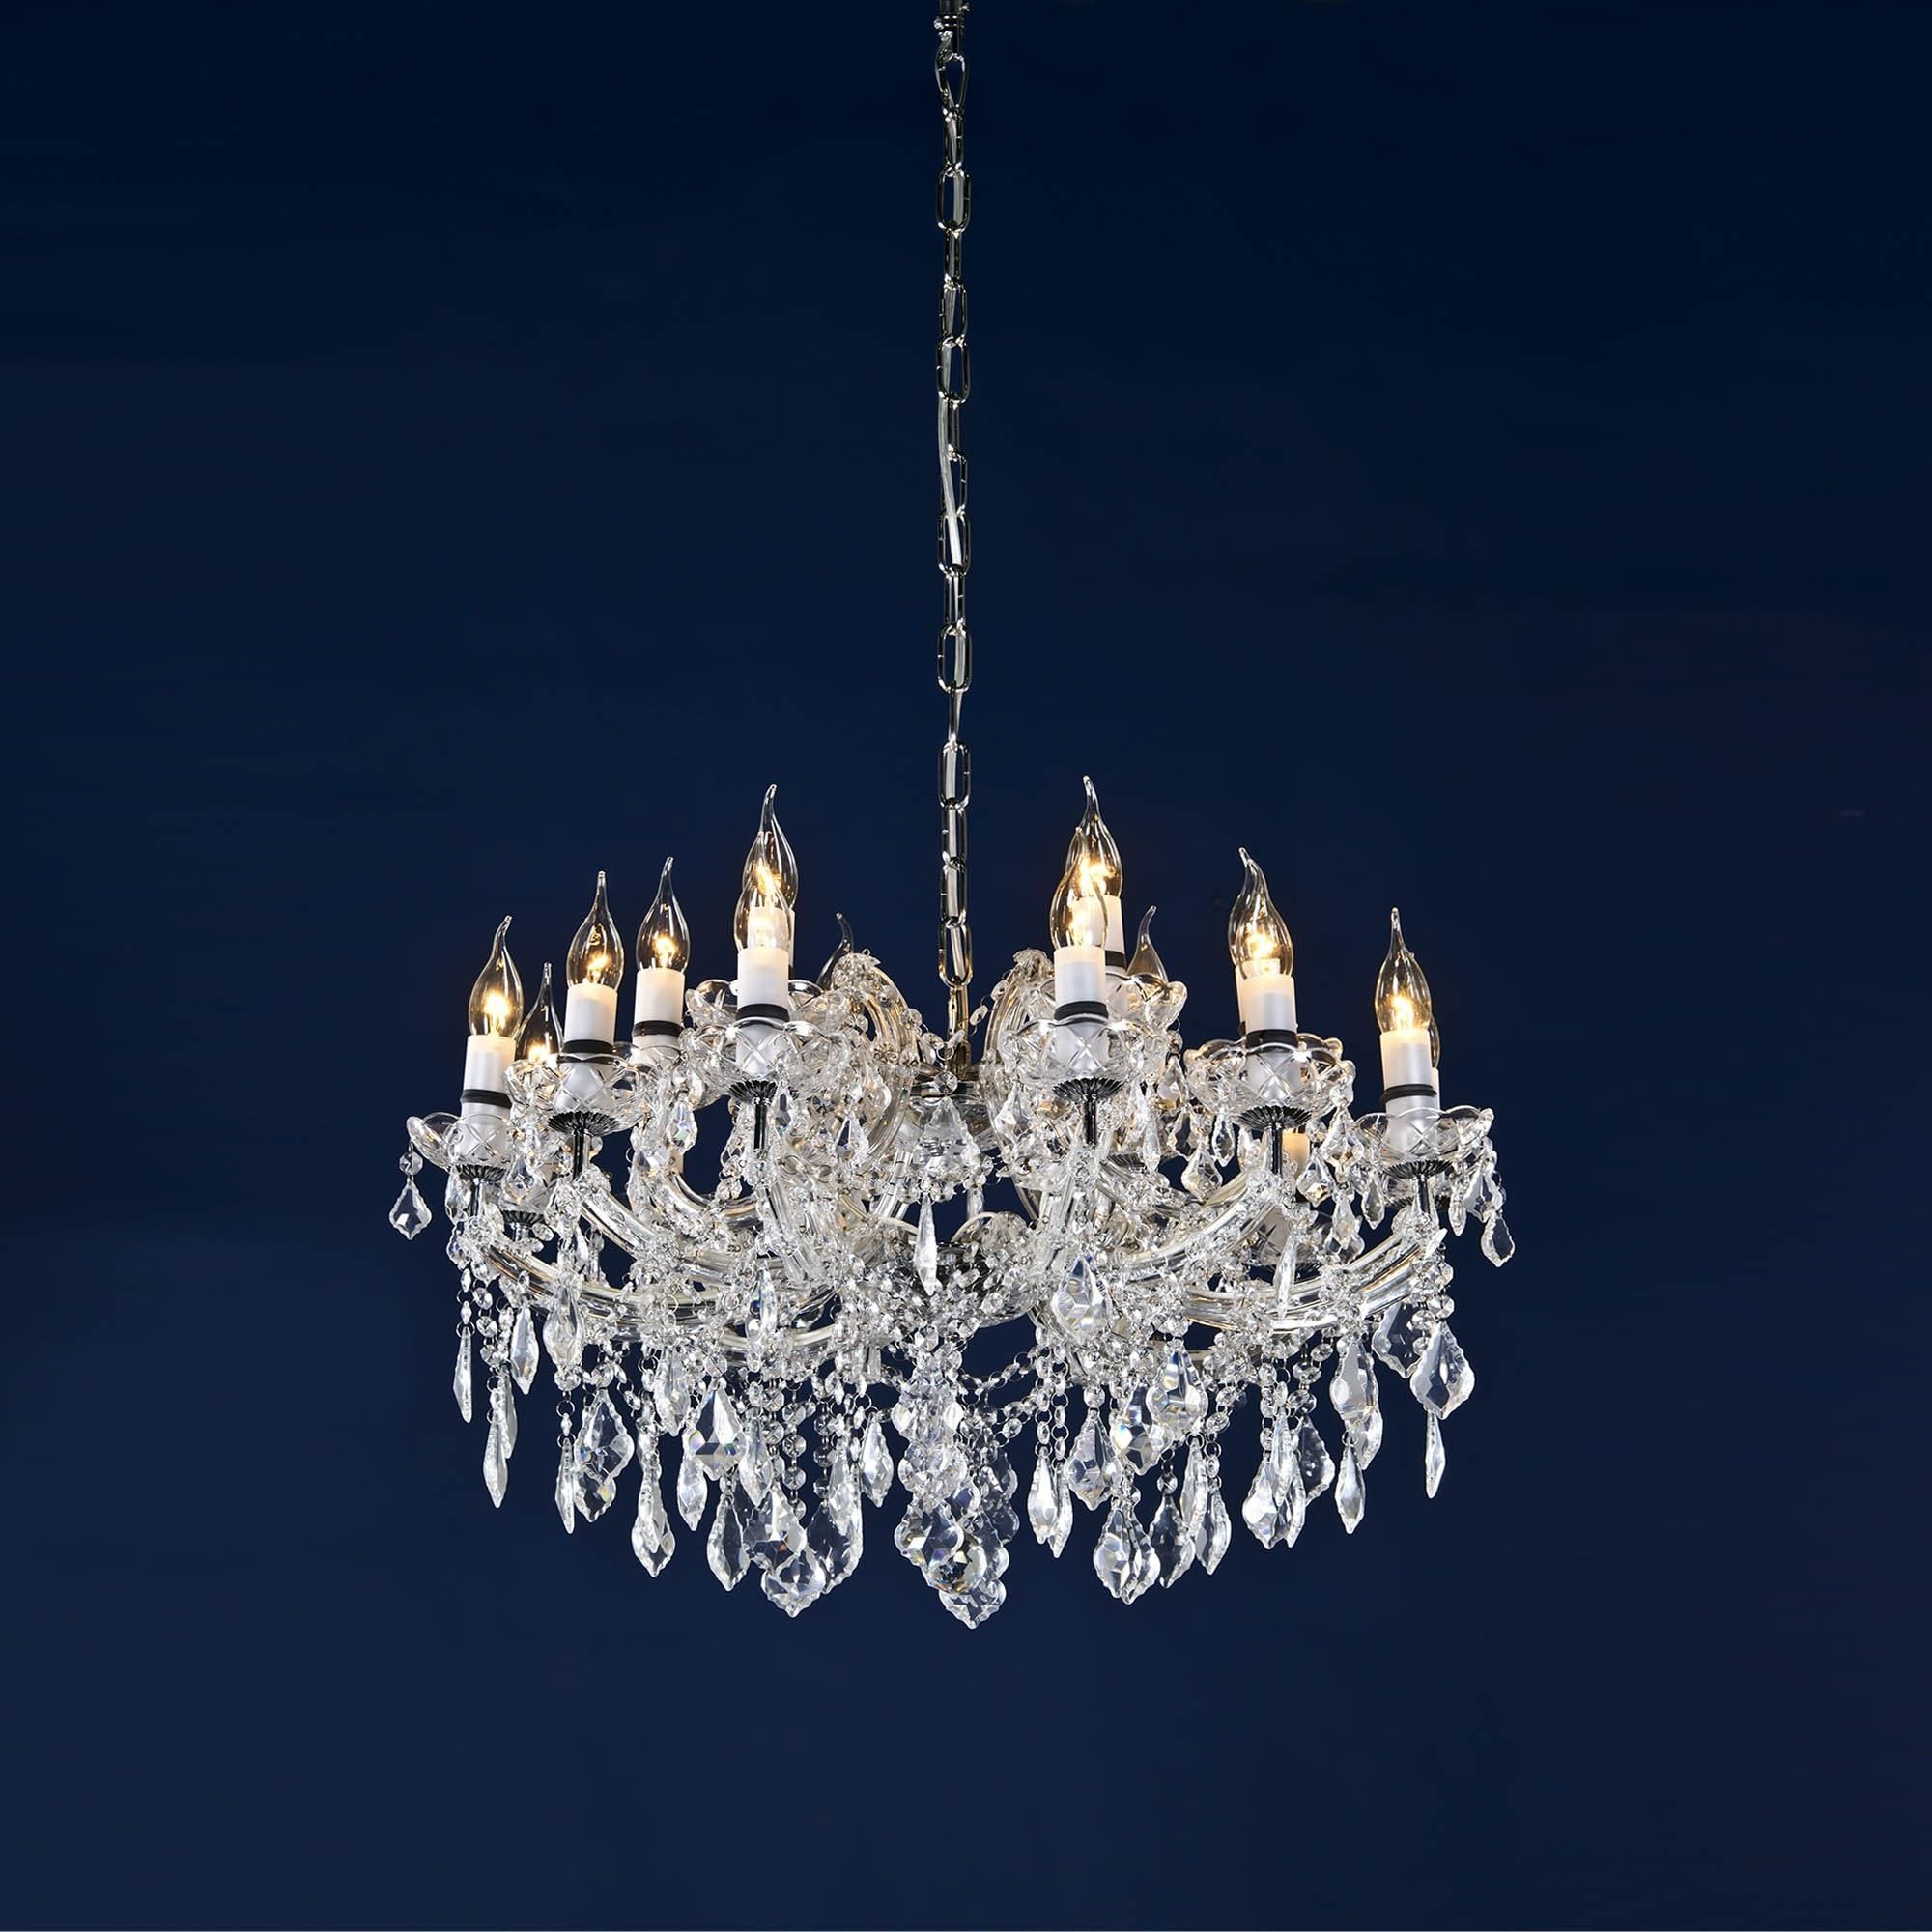 Chrome Crystal 18 Light Chandelier | French Lighting Inside Chrome And Crystal Pendant Lights (View 14 of 15)